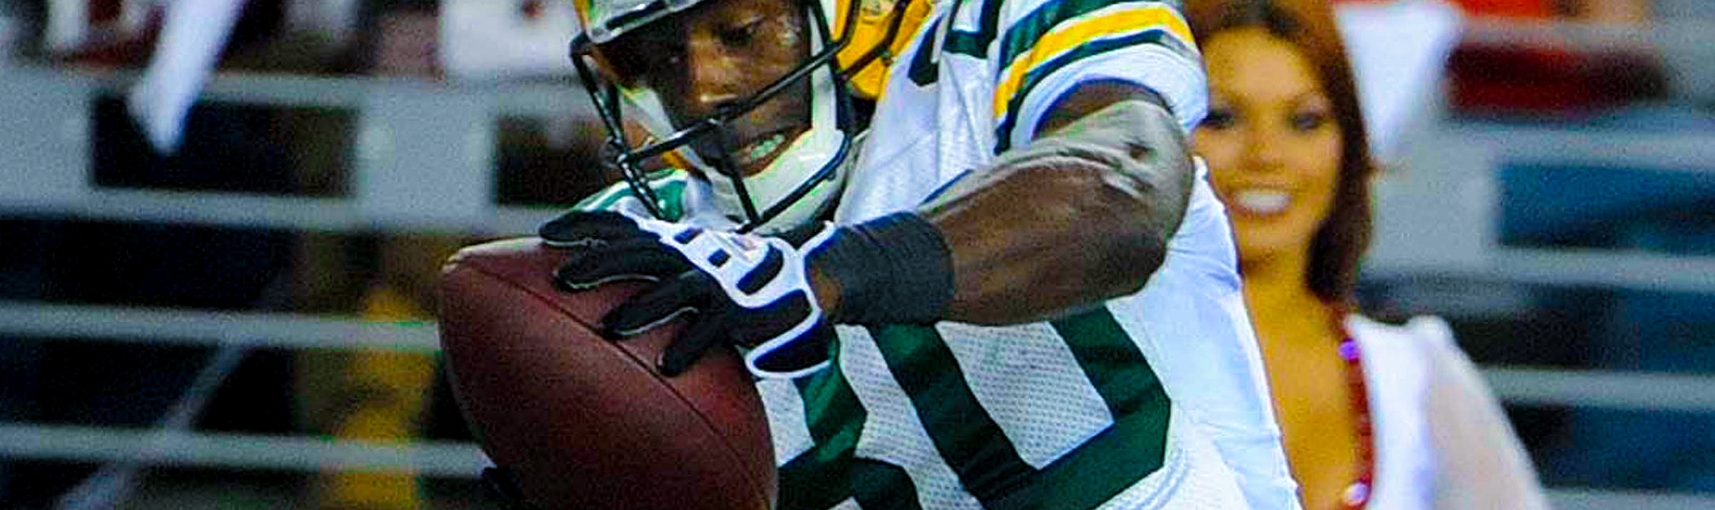 A man in a Green Bay Packers football uniform catches a football